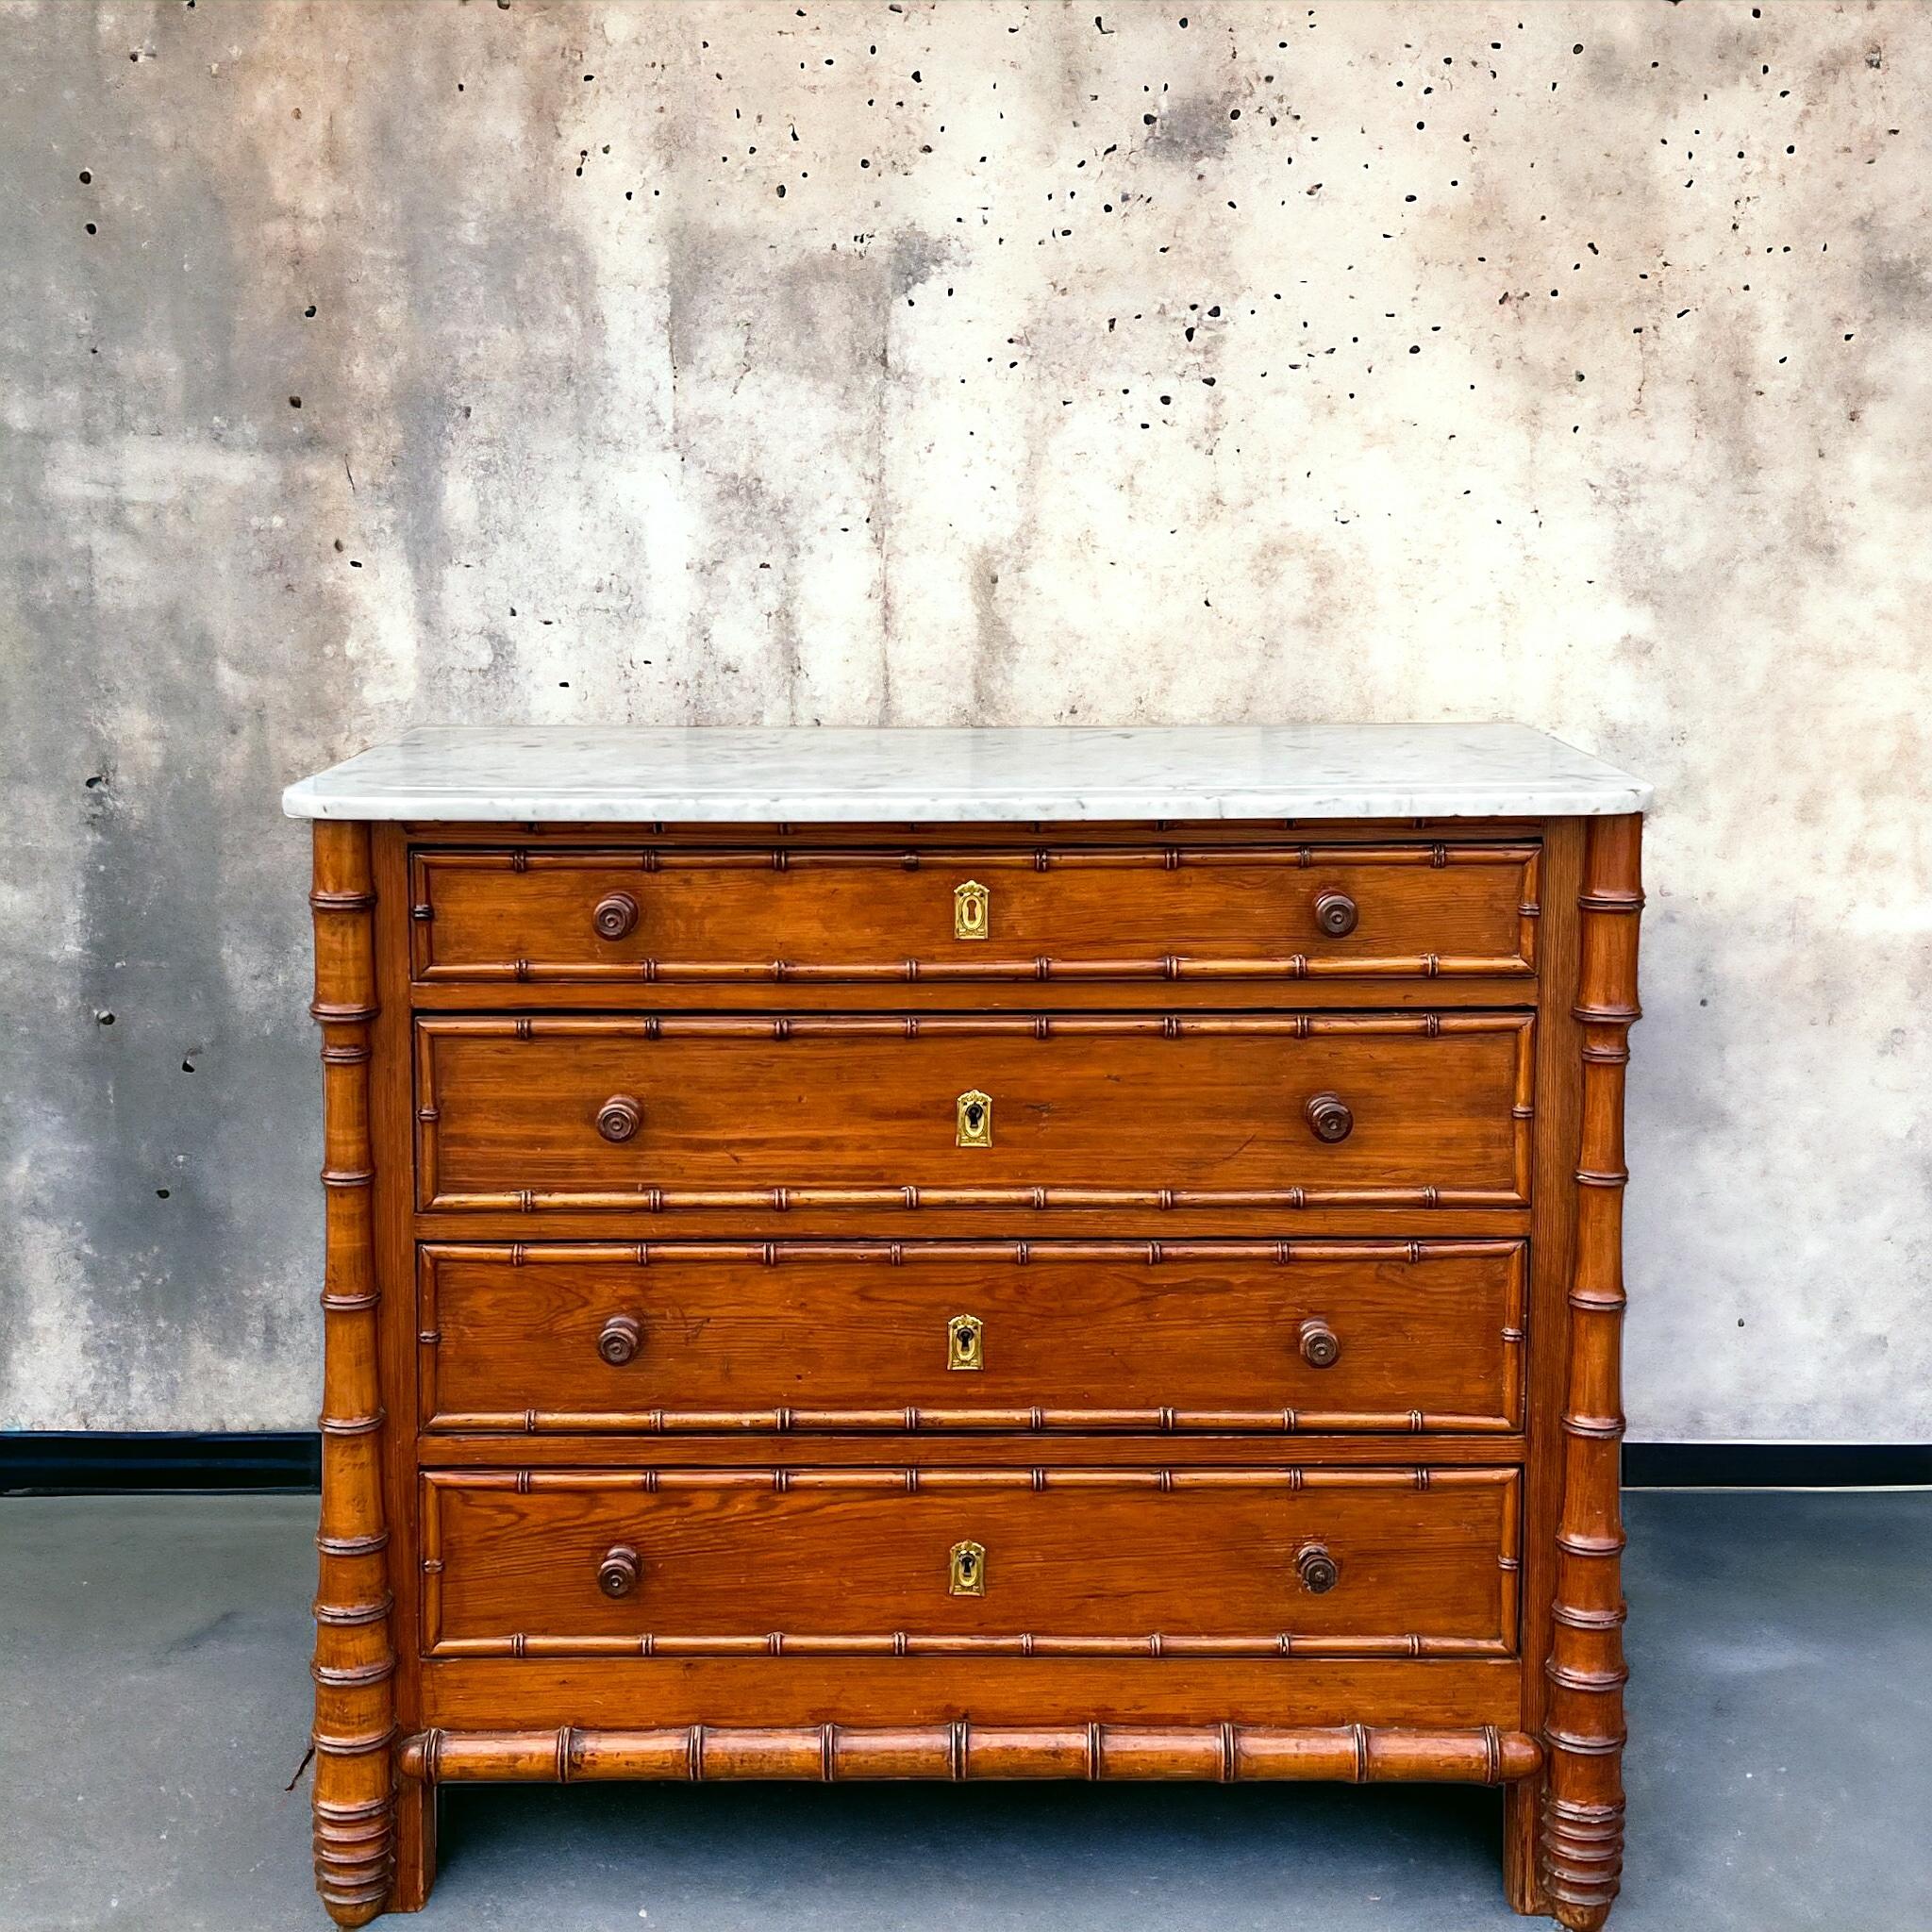 19th-C. French Aesthetic Movement Faux Bamboo Pine & Marble Chest / Commode 1